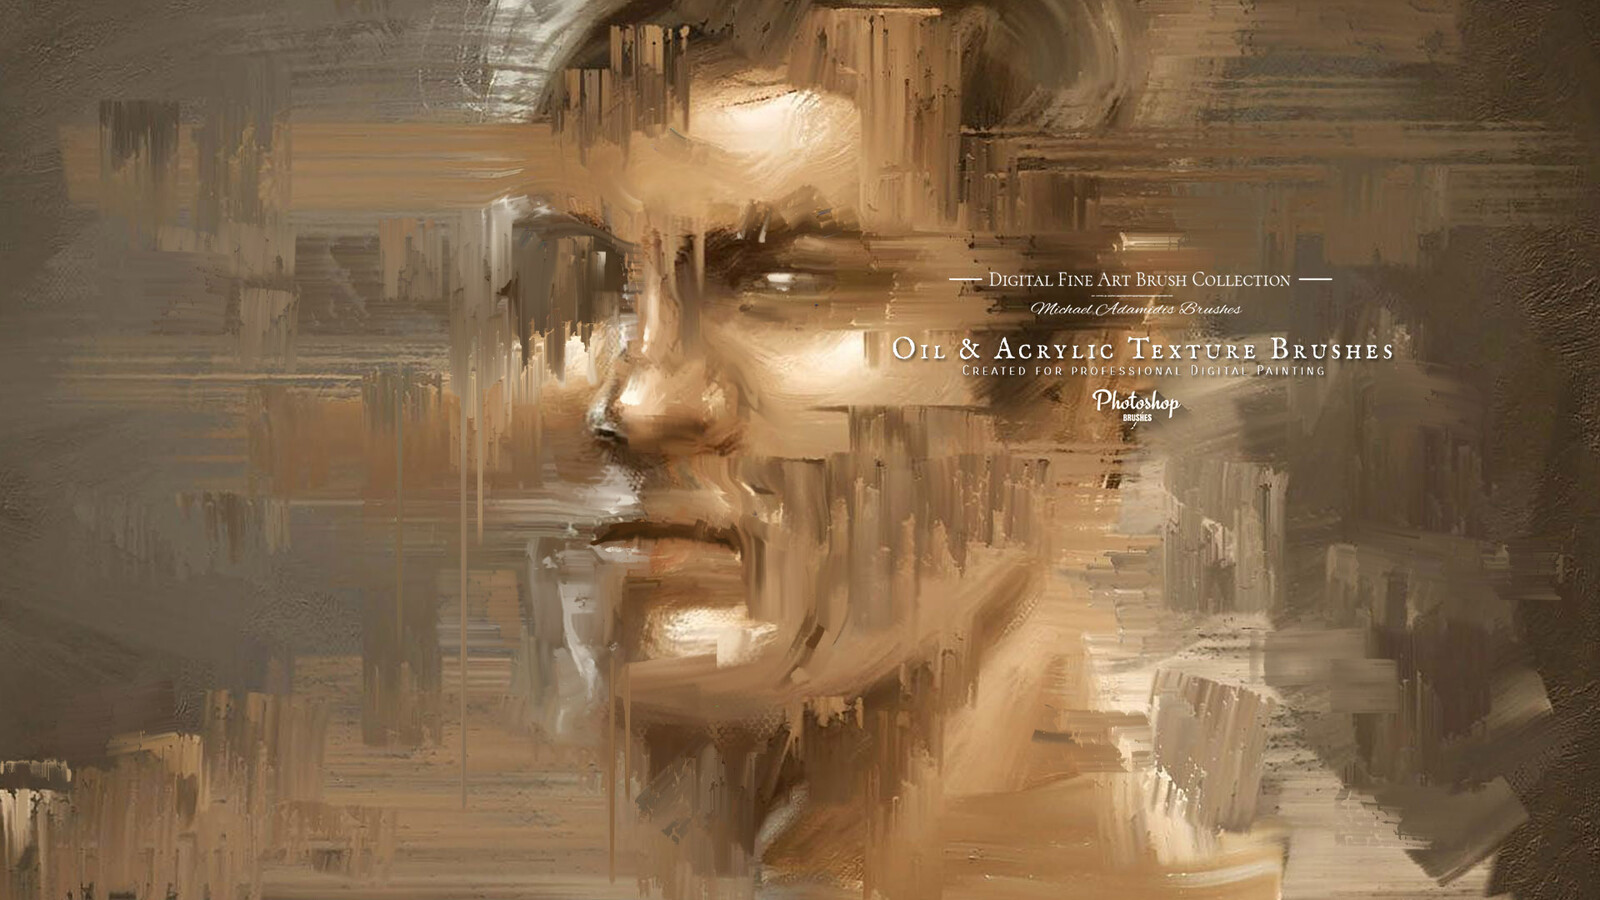 Photoshop Abstract Portrait Painting / Character Concept Painting